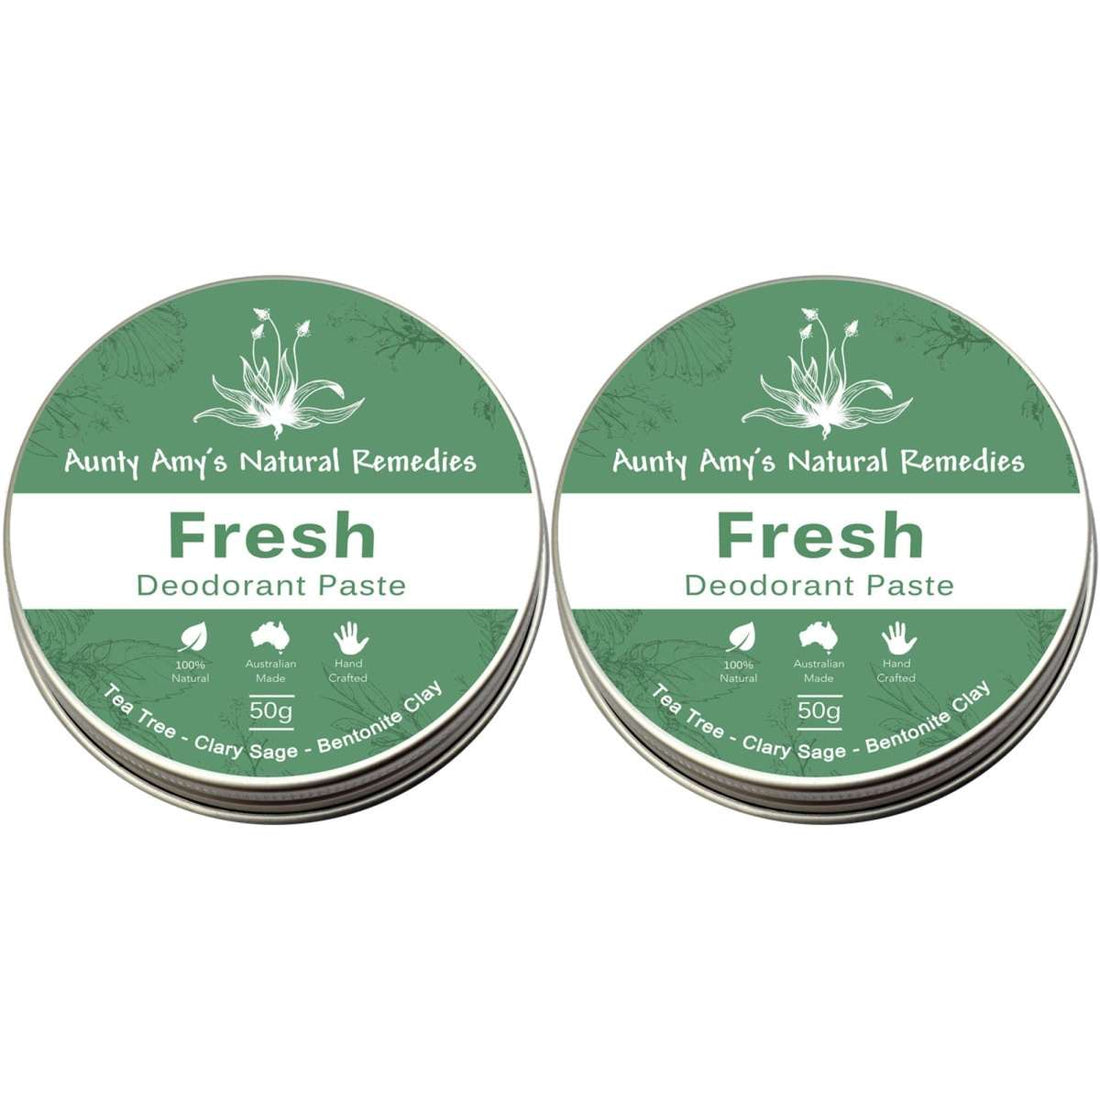 Aunty Amy's Natural Remedies Fresh Deodorant Paste 2 Pack 50g